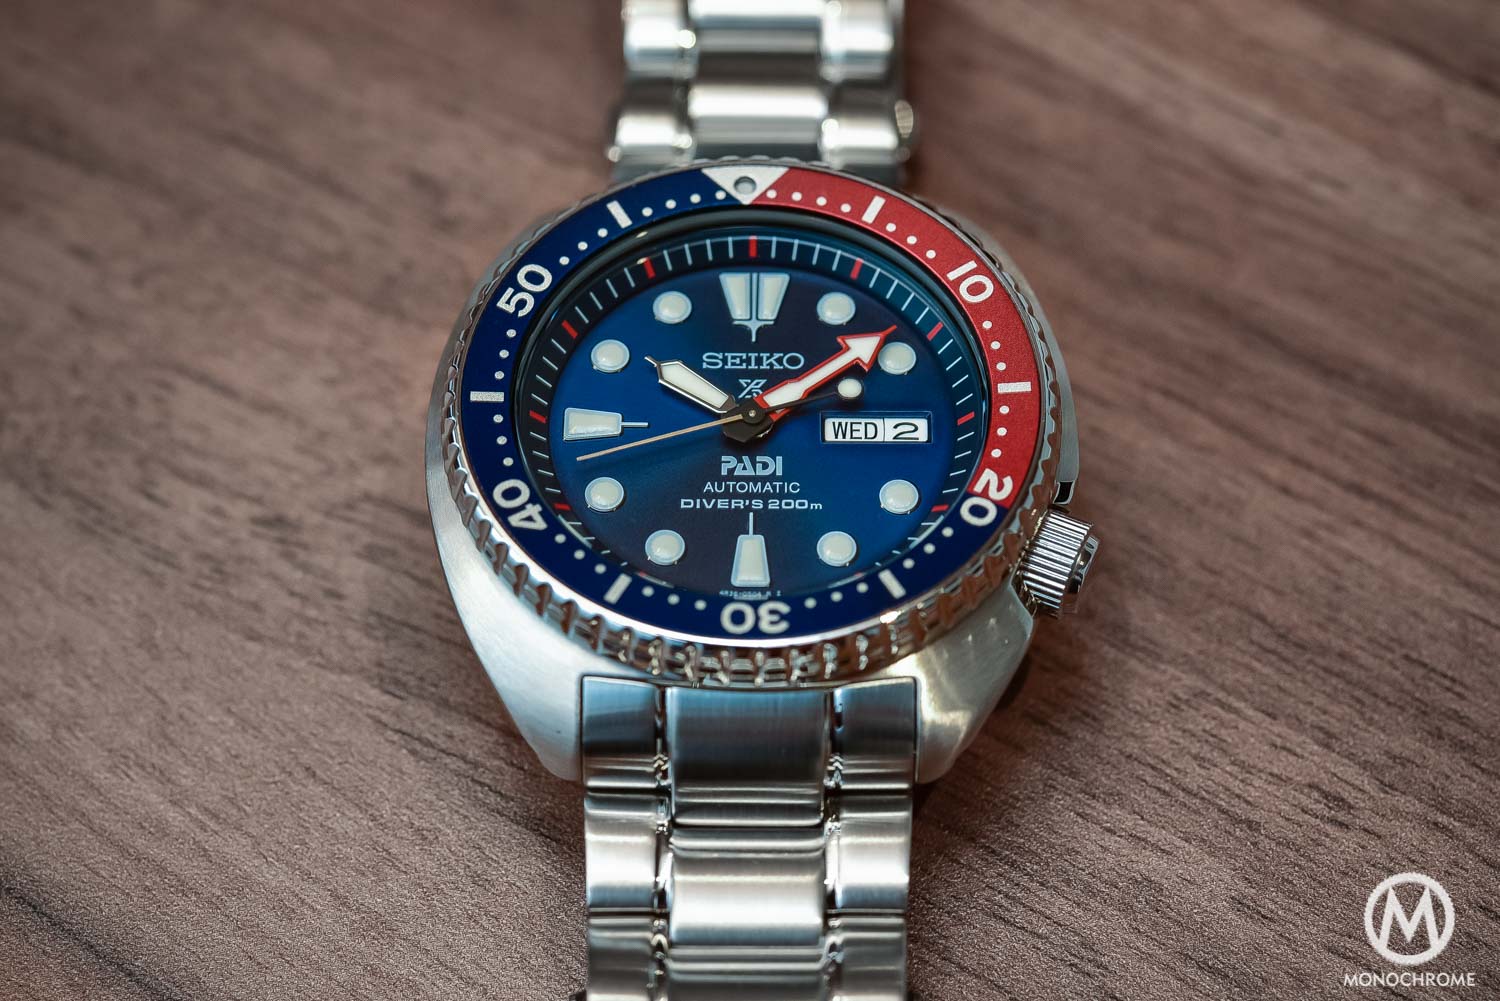 Reviewing The Seiko Prospex SRPA21 PADI Turtle Watch - The Best Swiss Watch  Fix, Repair, Maintenance & Care Tips Online